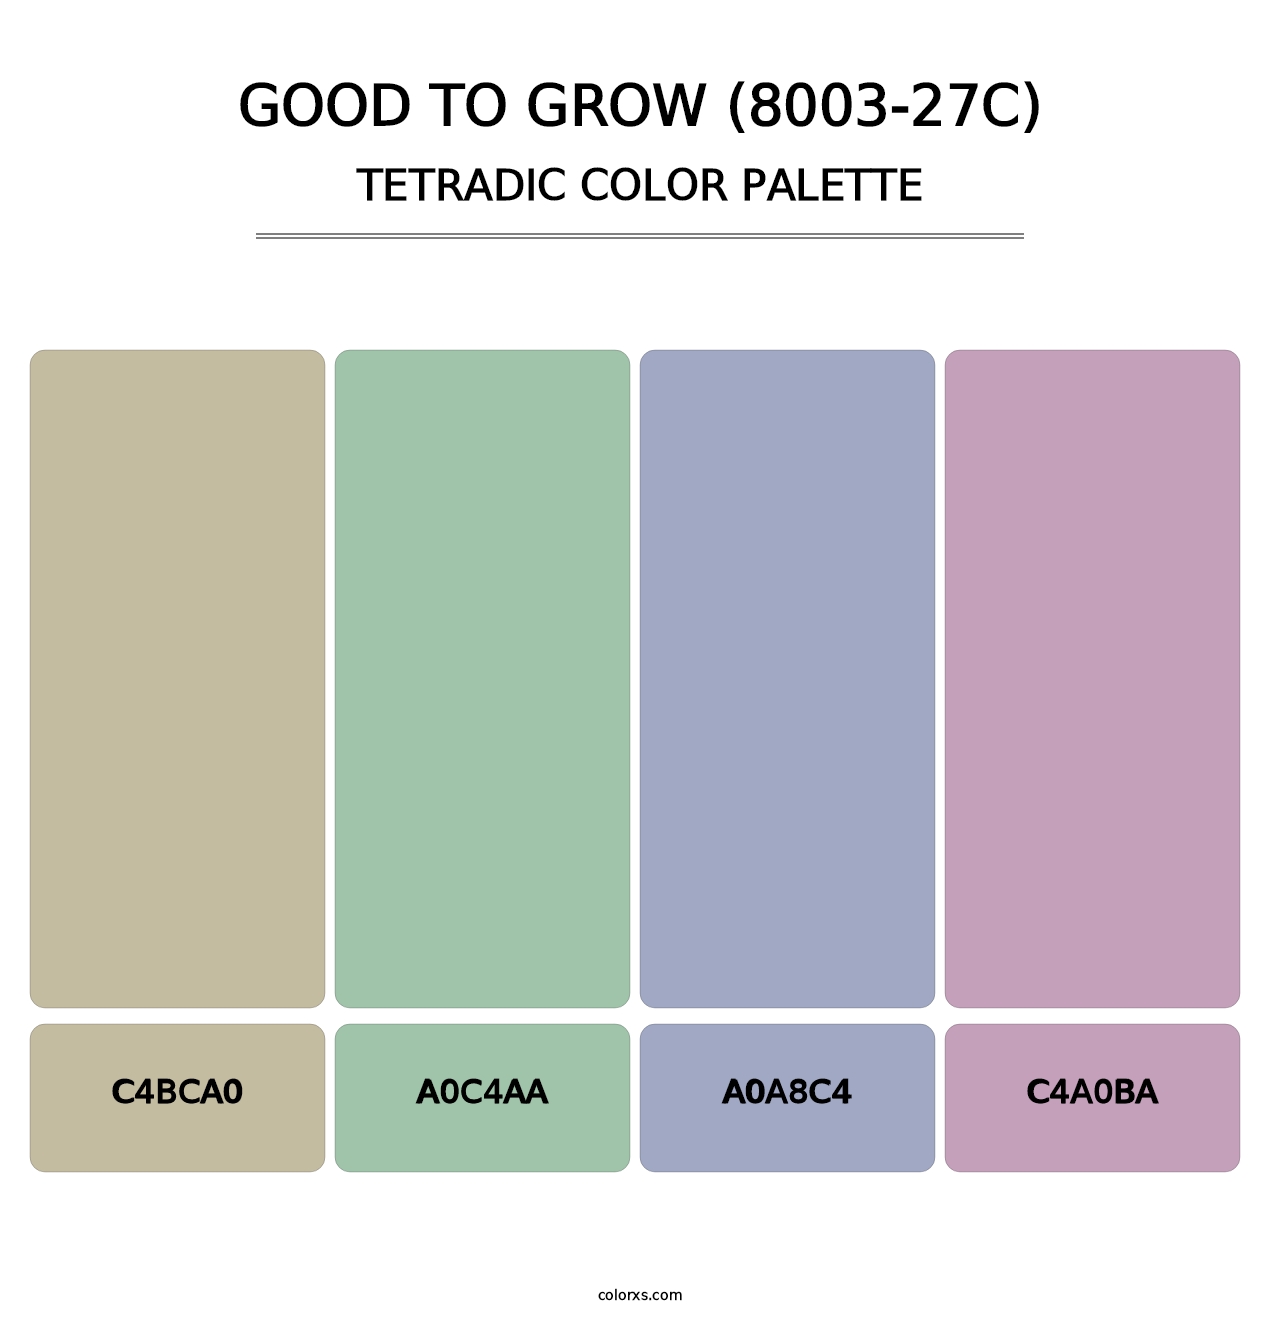 Good to Grow (8003-27C) - Tetradic Color Palette